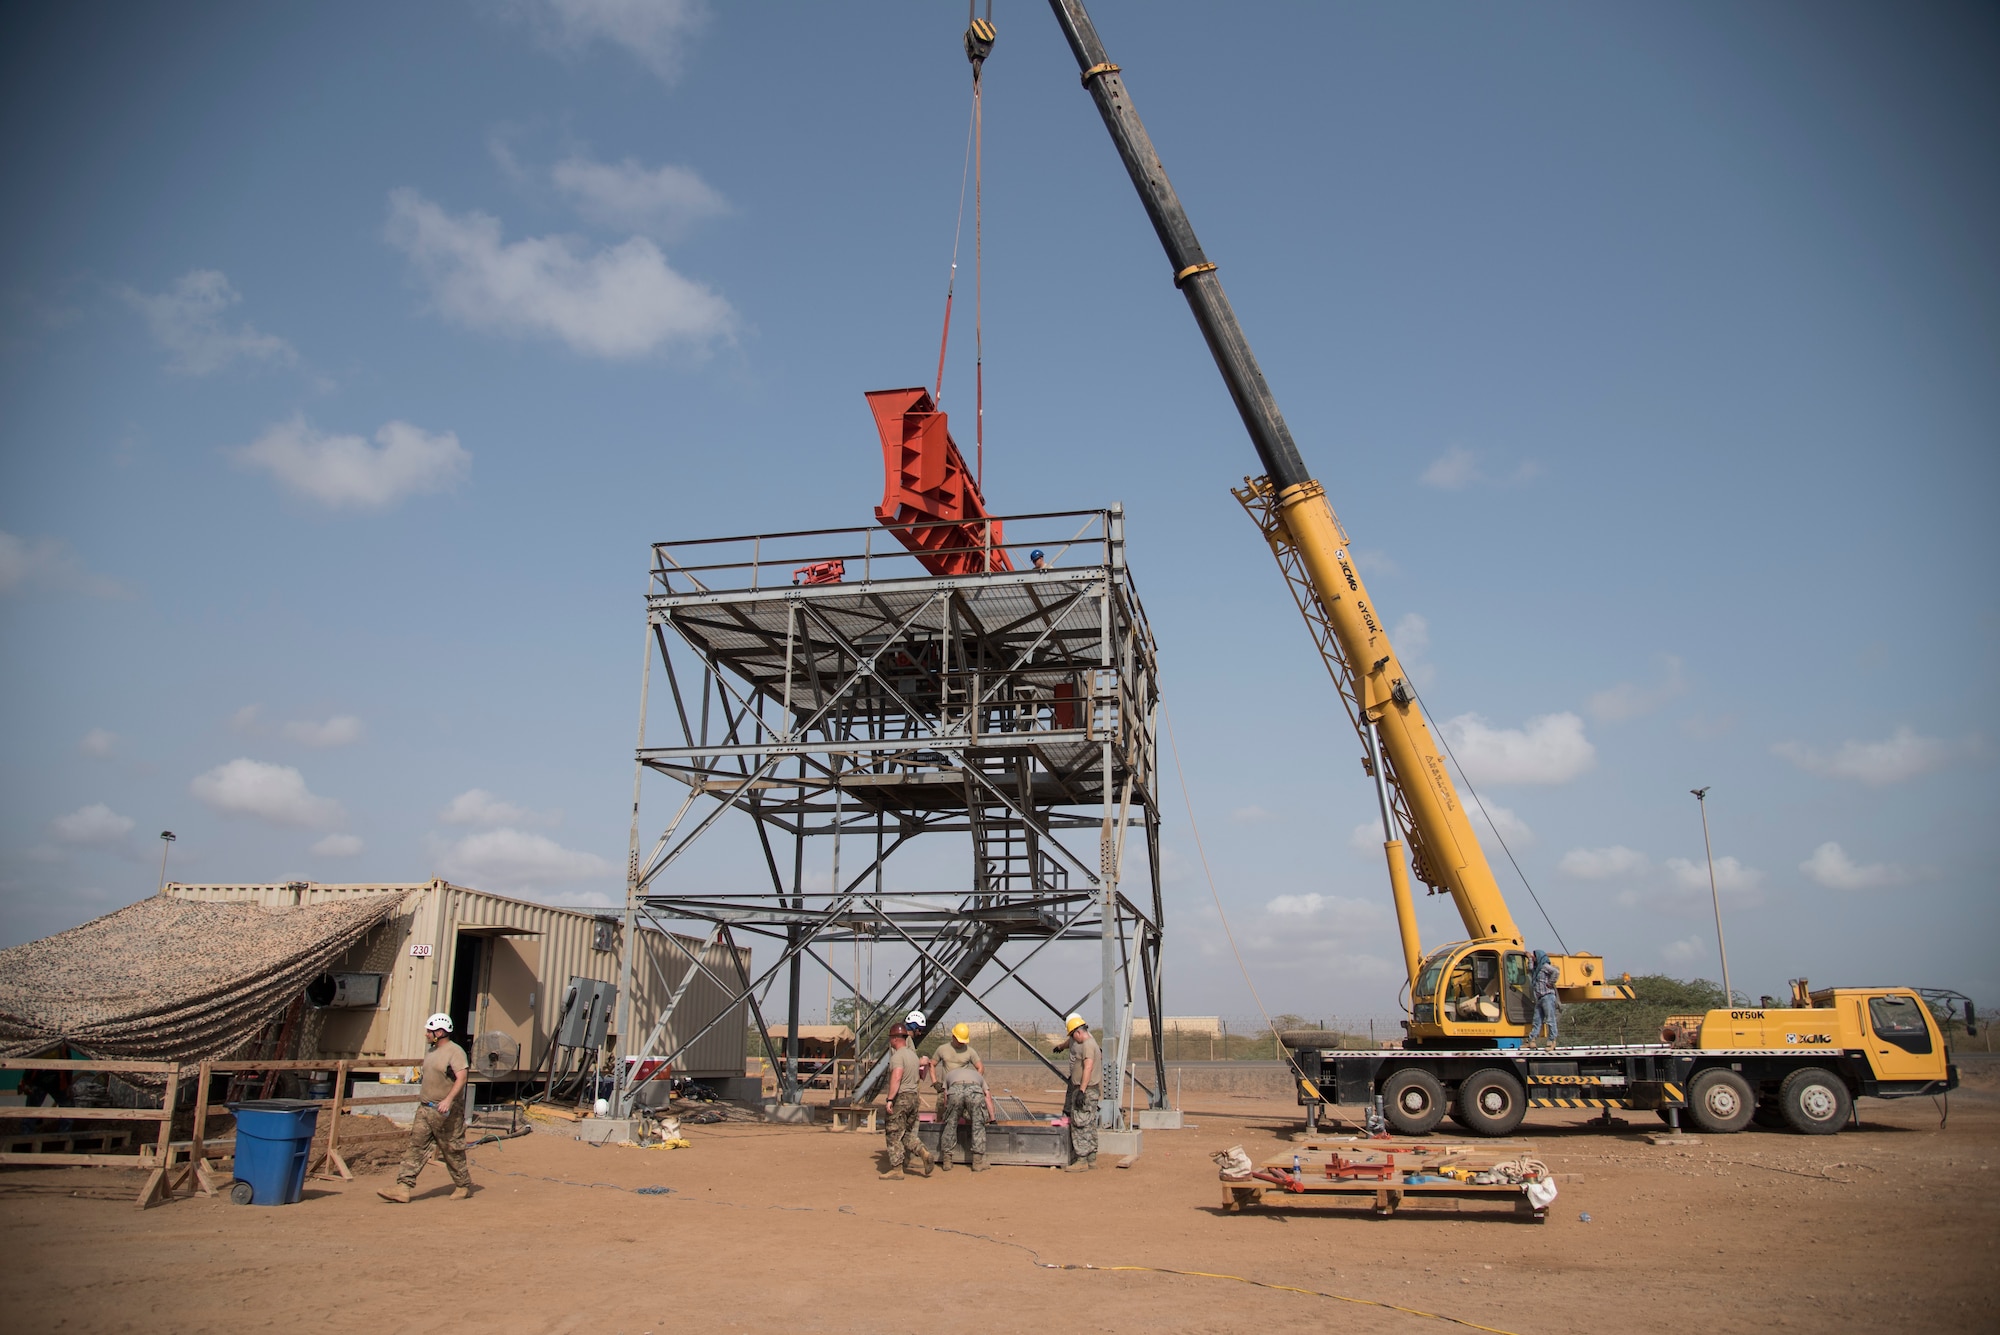 U.S. Air Force Airmen of the 205th Engineering Installation Squadron, Oklahoma City install a new AN/GPN-27 Airport Surveillance Radar System tower, June 4, 2016, at Camp Lemonnier, Djibouti. With coordination between the 205 EIS, U.S. Air Forces in Europe, U.S. Air Force Flight Standards Agency, U.S. Air Force Central Command and the U.S. Navy, the new radar will increase air traffic control capabilities and safety. (U.S. Air Force photo by Staff Sgt. Tiffany DeNault)